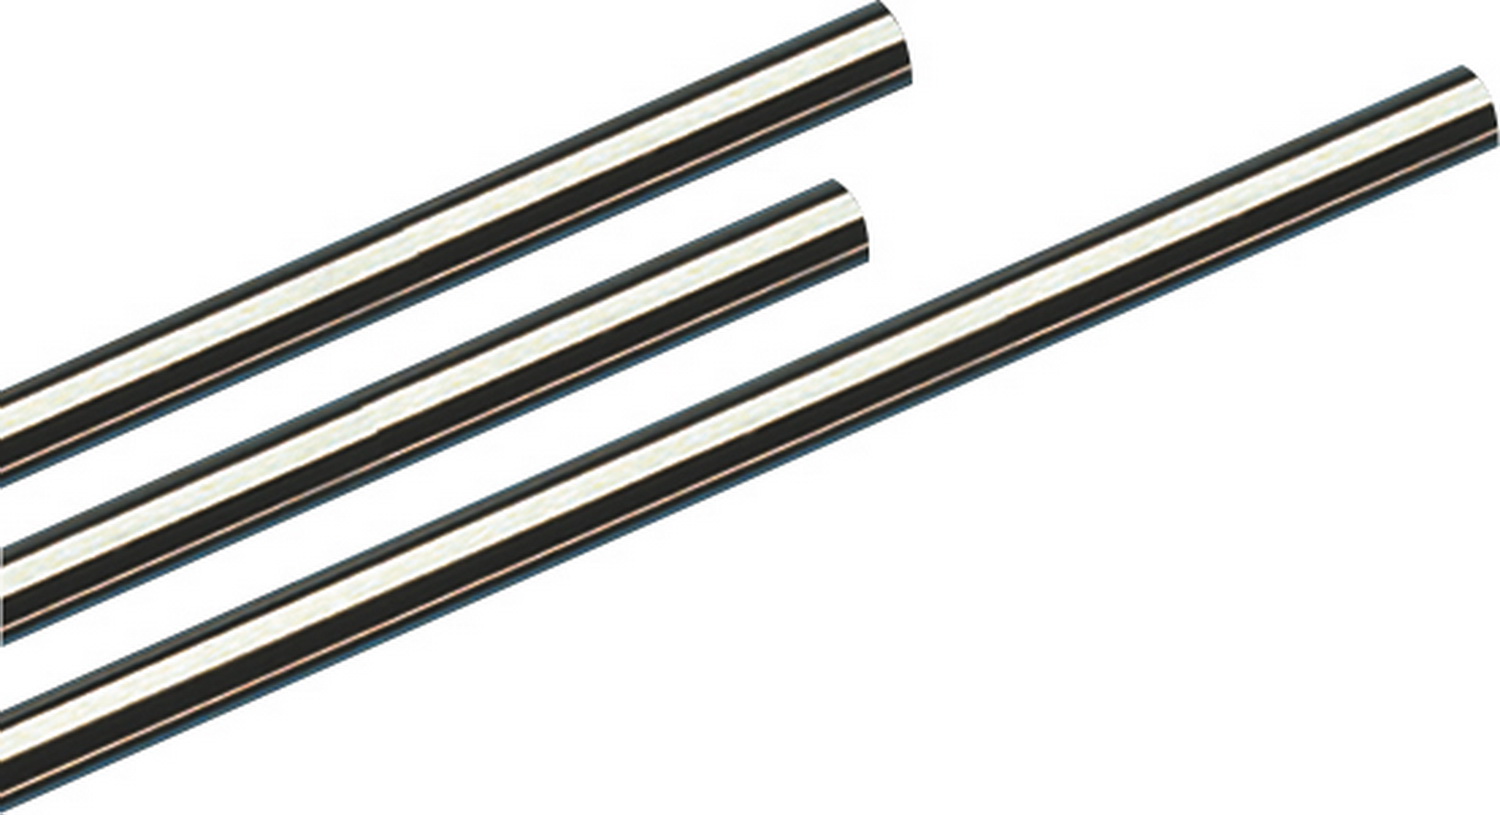 2.5" T-304 Stainless Steel Straight Tubing. 30350